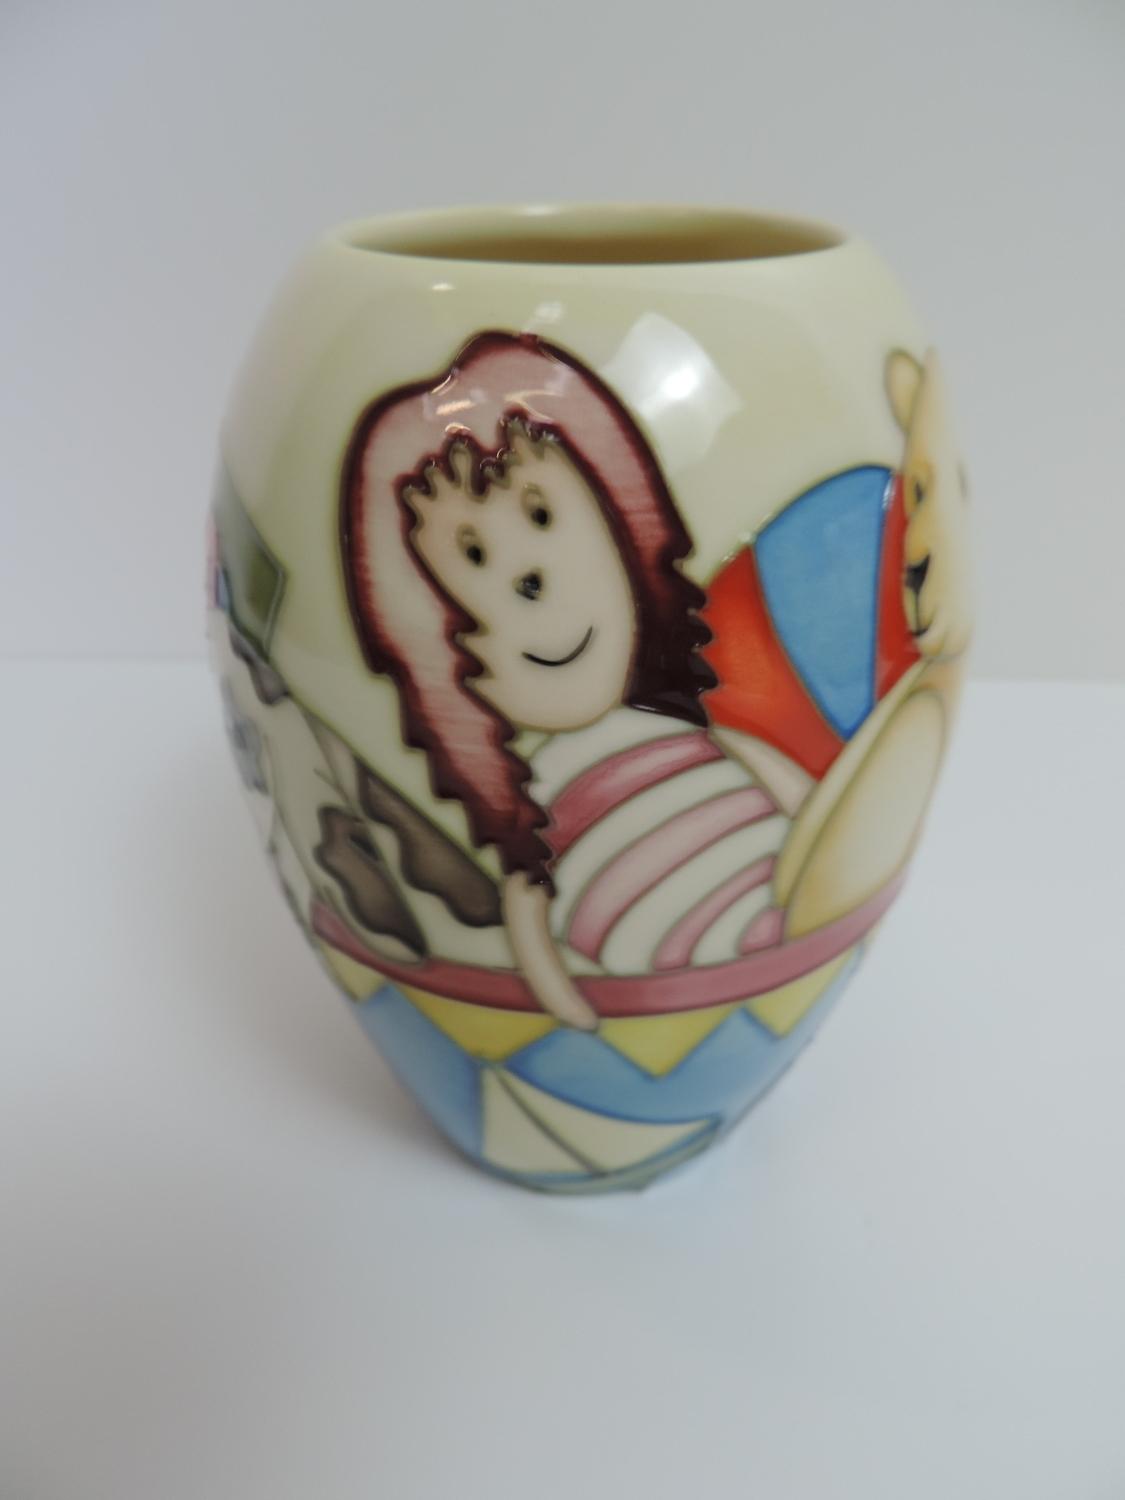 Moorcroft Pottery Vase in the Rag Doll Anna Pattern Designed by Sian Leeper - 13cm High - with